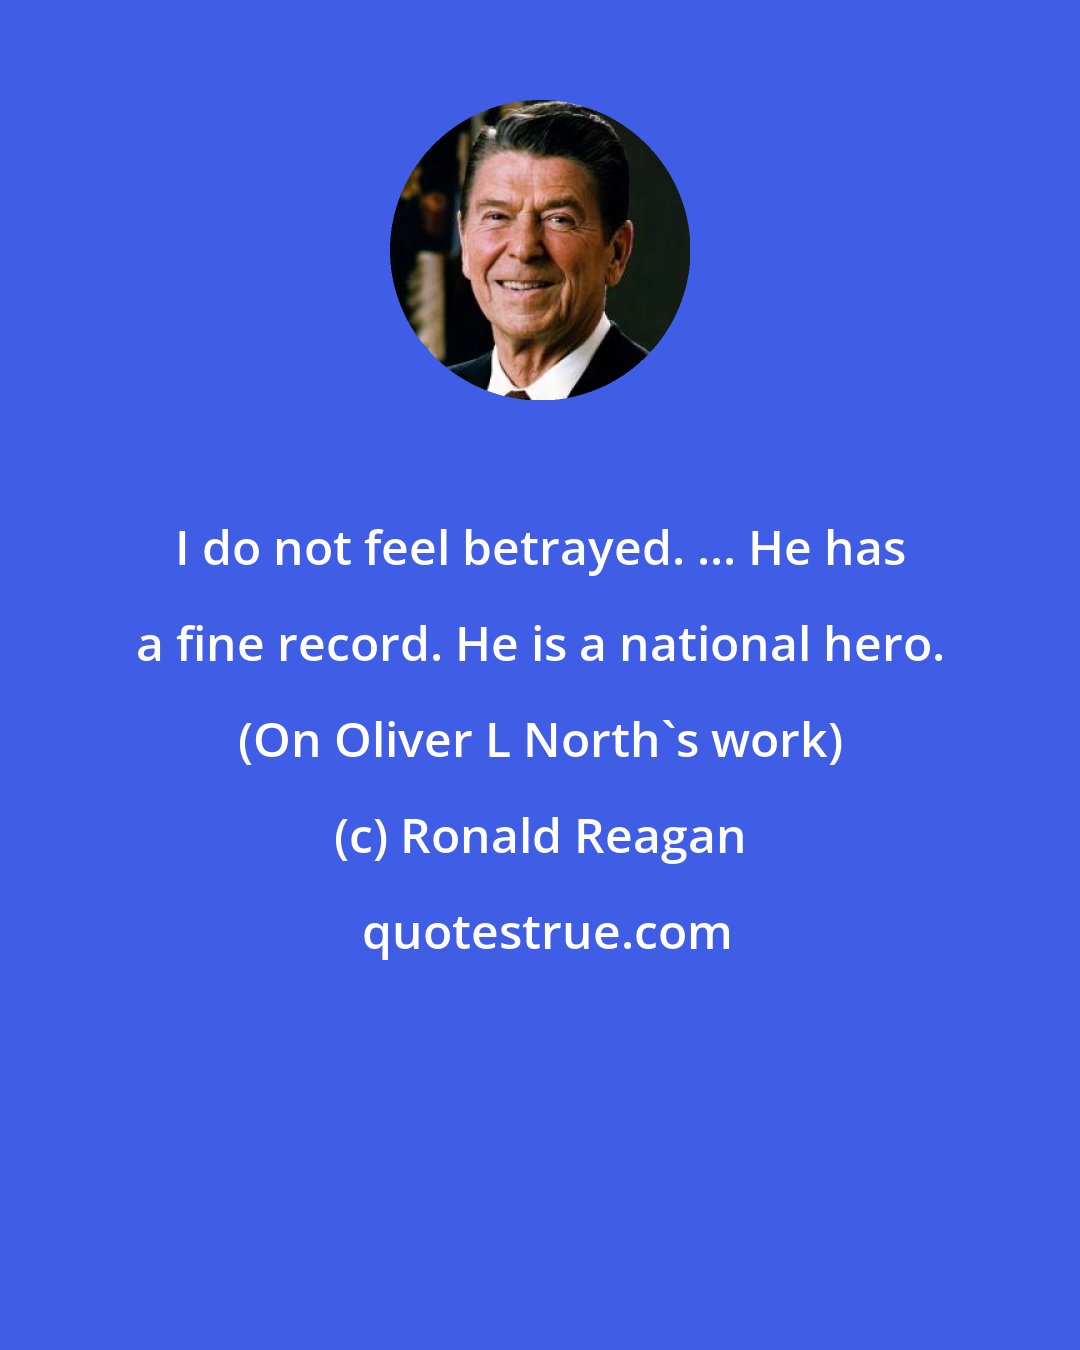 Ronald Reagan: I do not feel betrayed. ... He has a fine record. He is a national hero. (On Oliver L North's work)